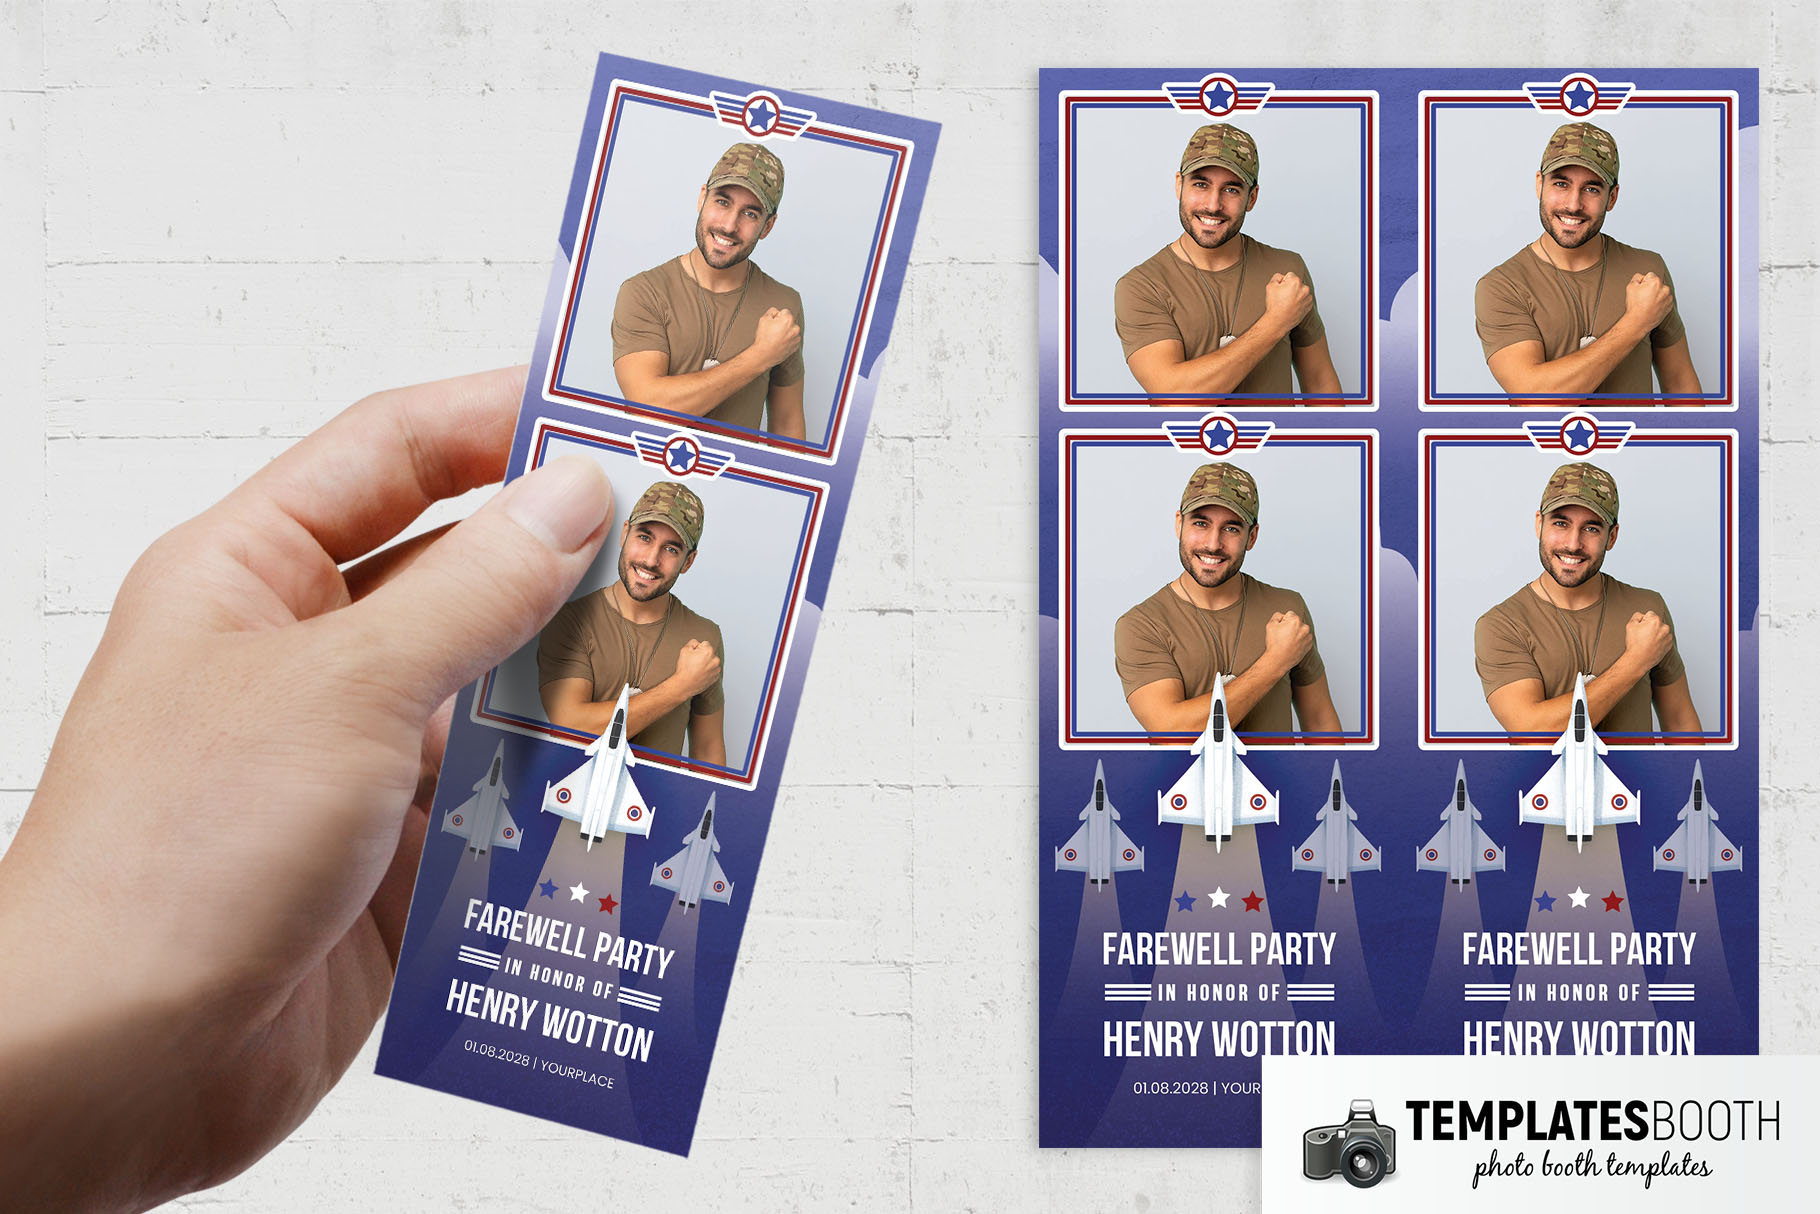 Air Force Photo Booth Template